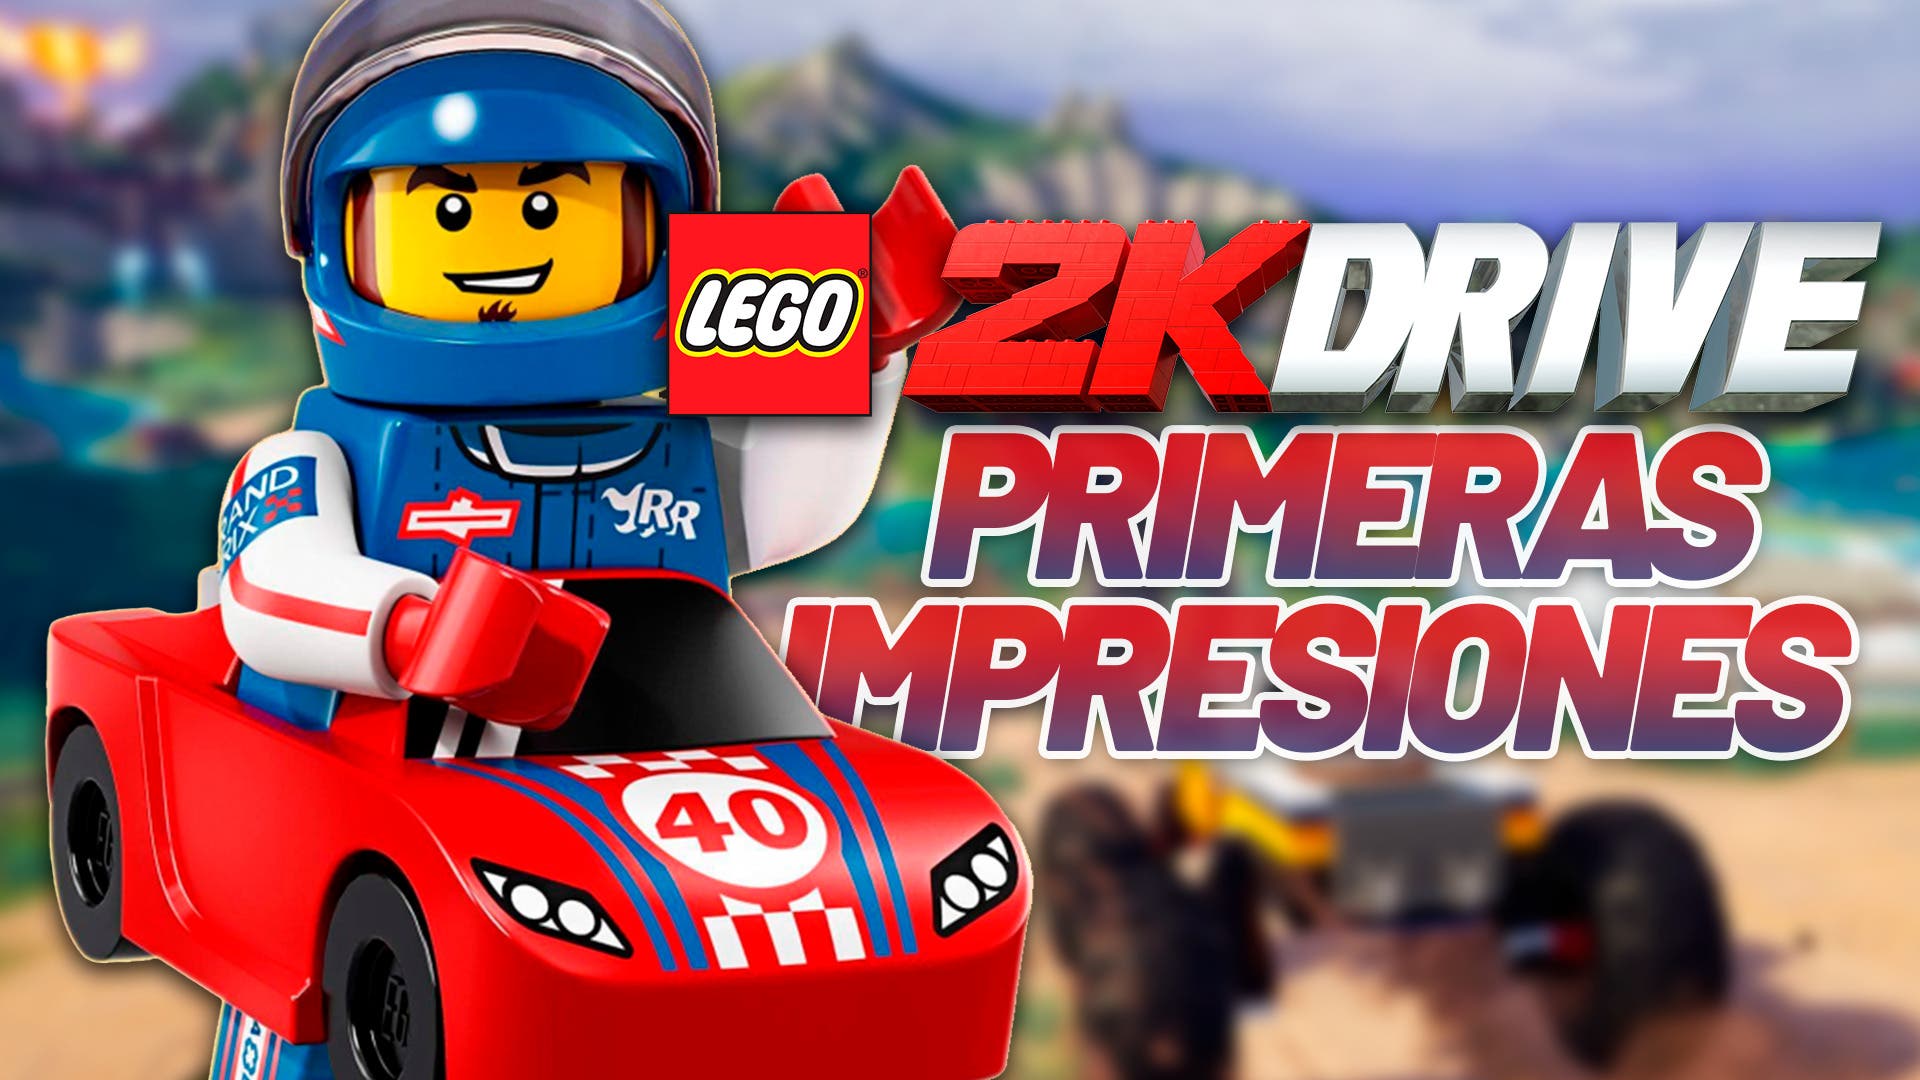 Lego 2K Drive first impressions: Lego is coming full throttle!